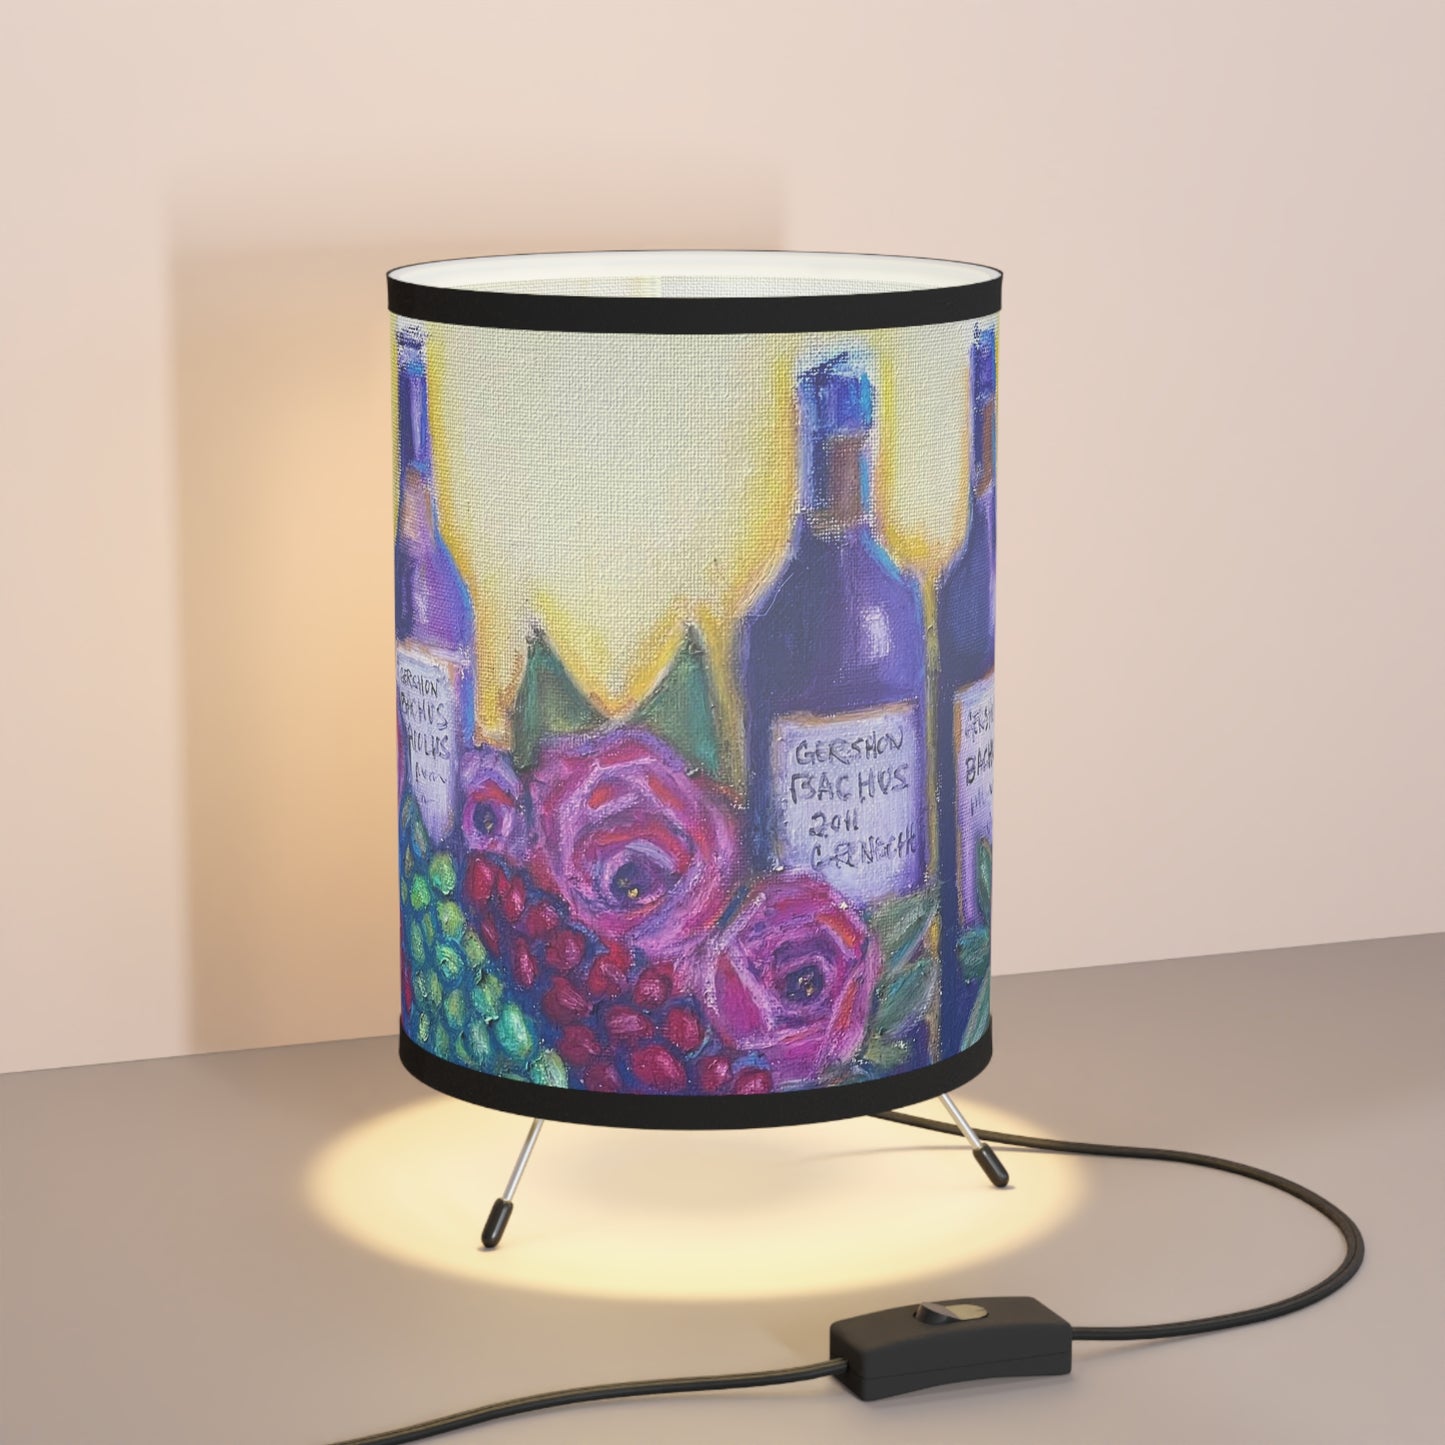 GBV Wine and Roses Tripod Lamp